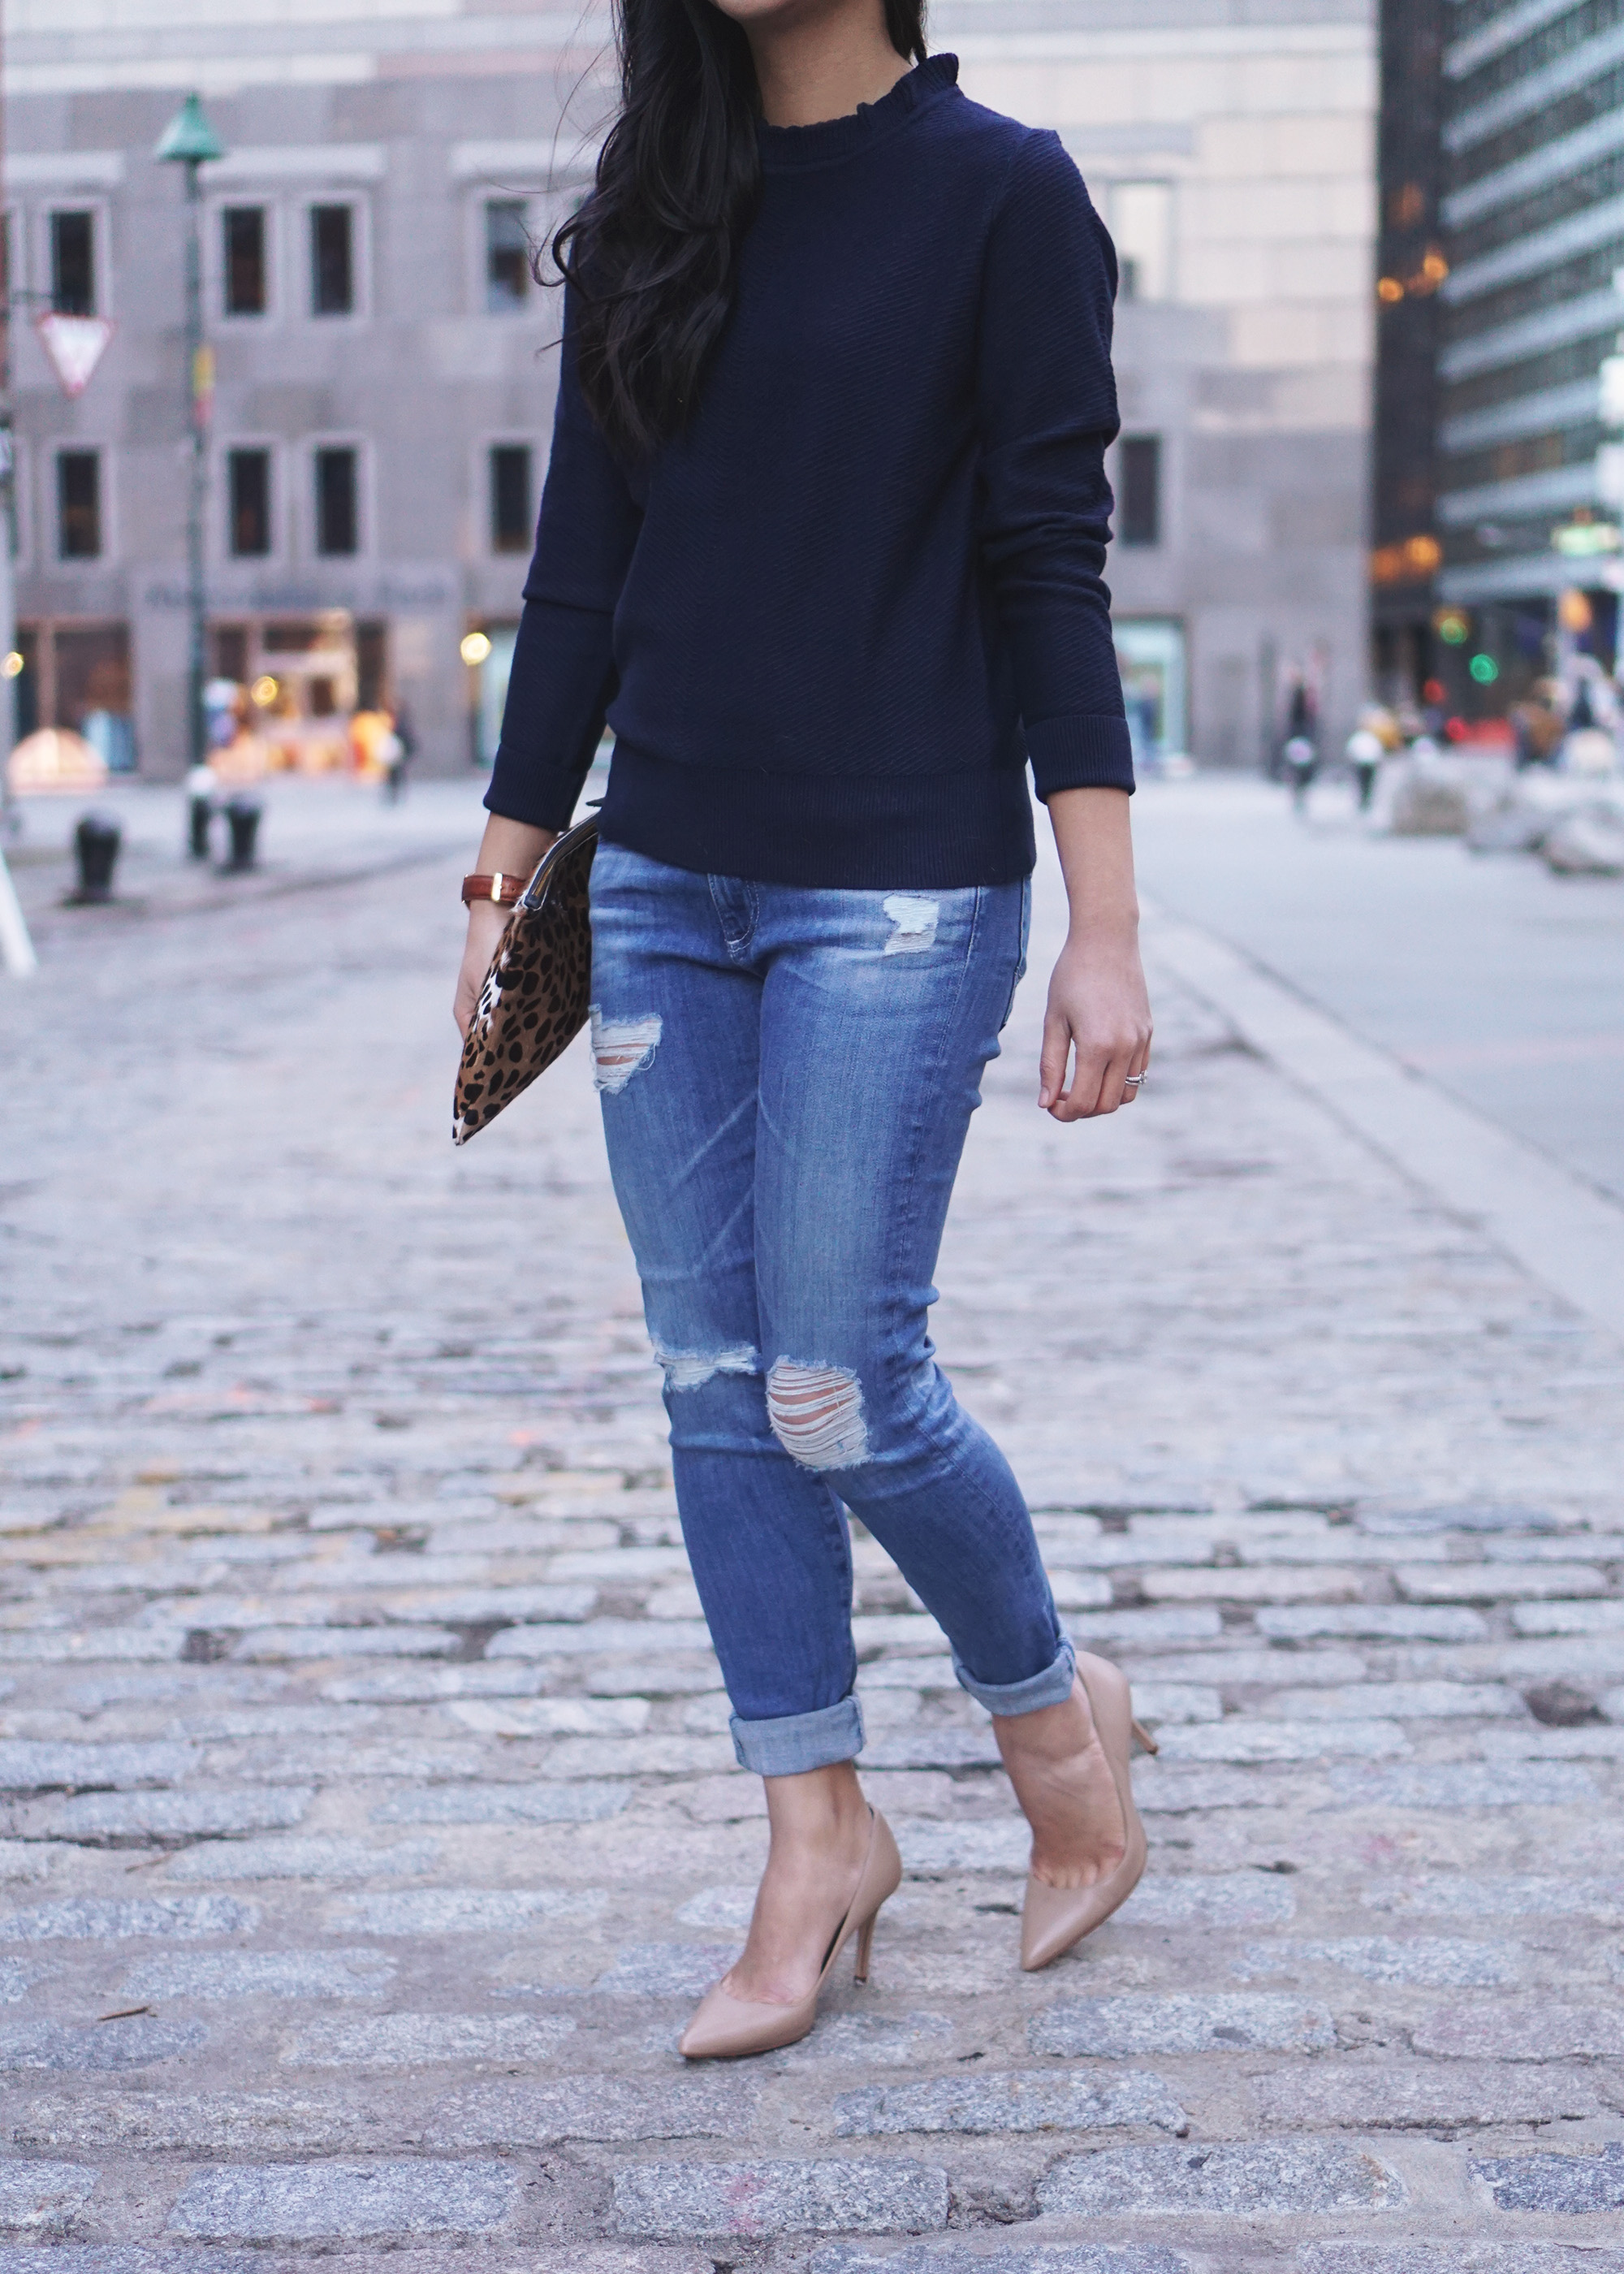 Spring Transition Outfit / Navy Sweater & Ripped Jeans